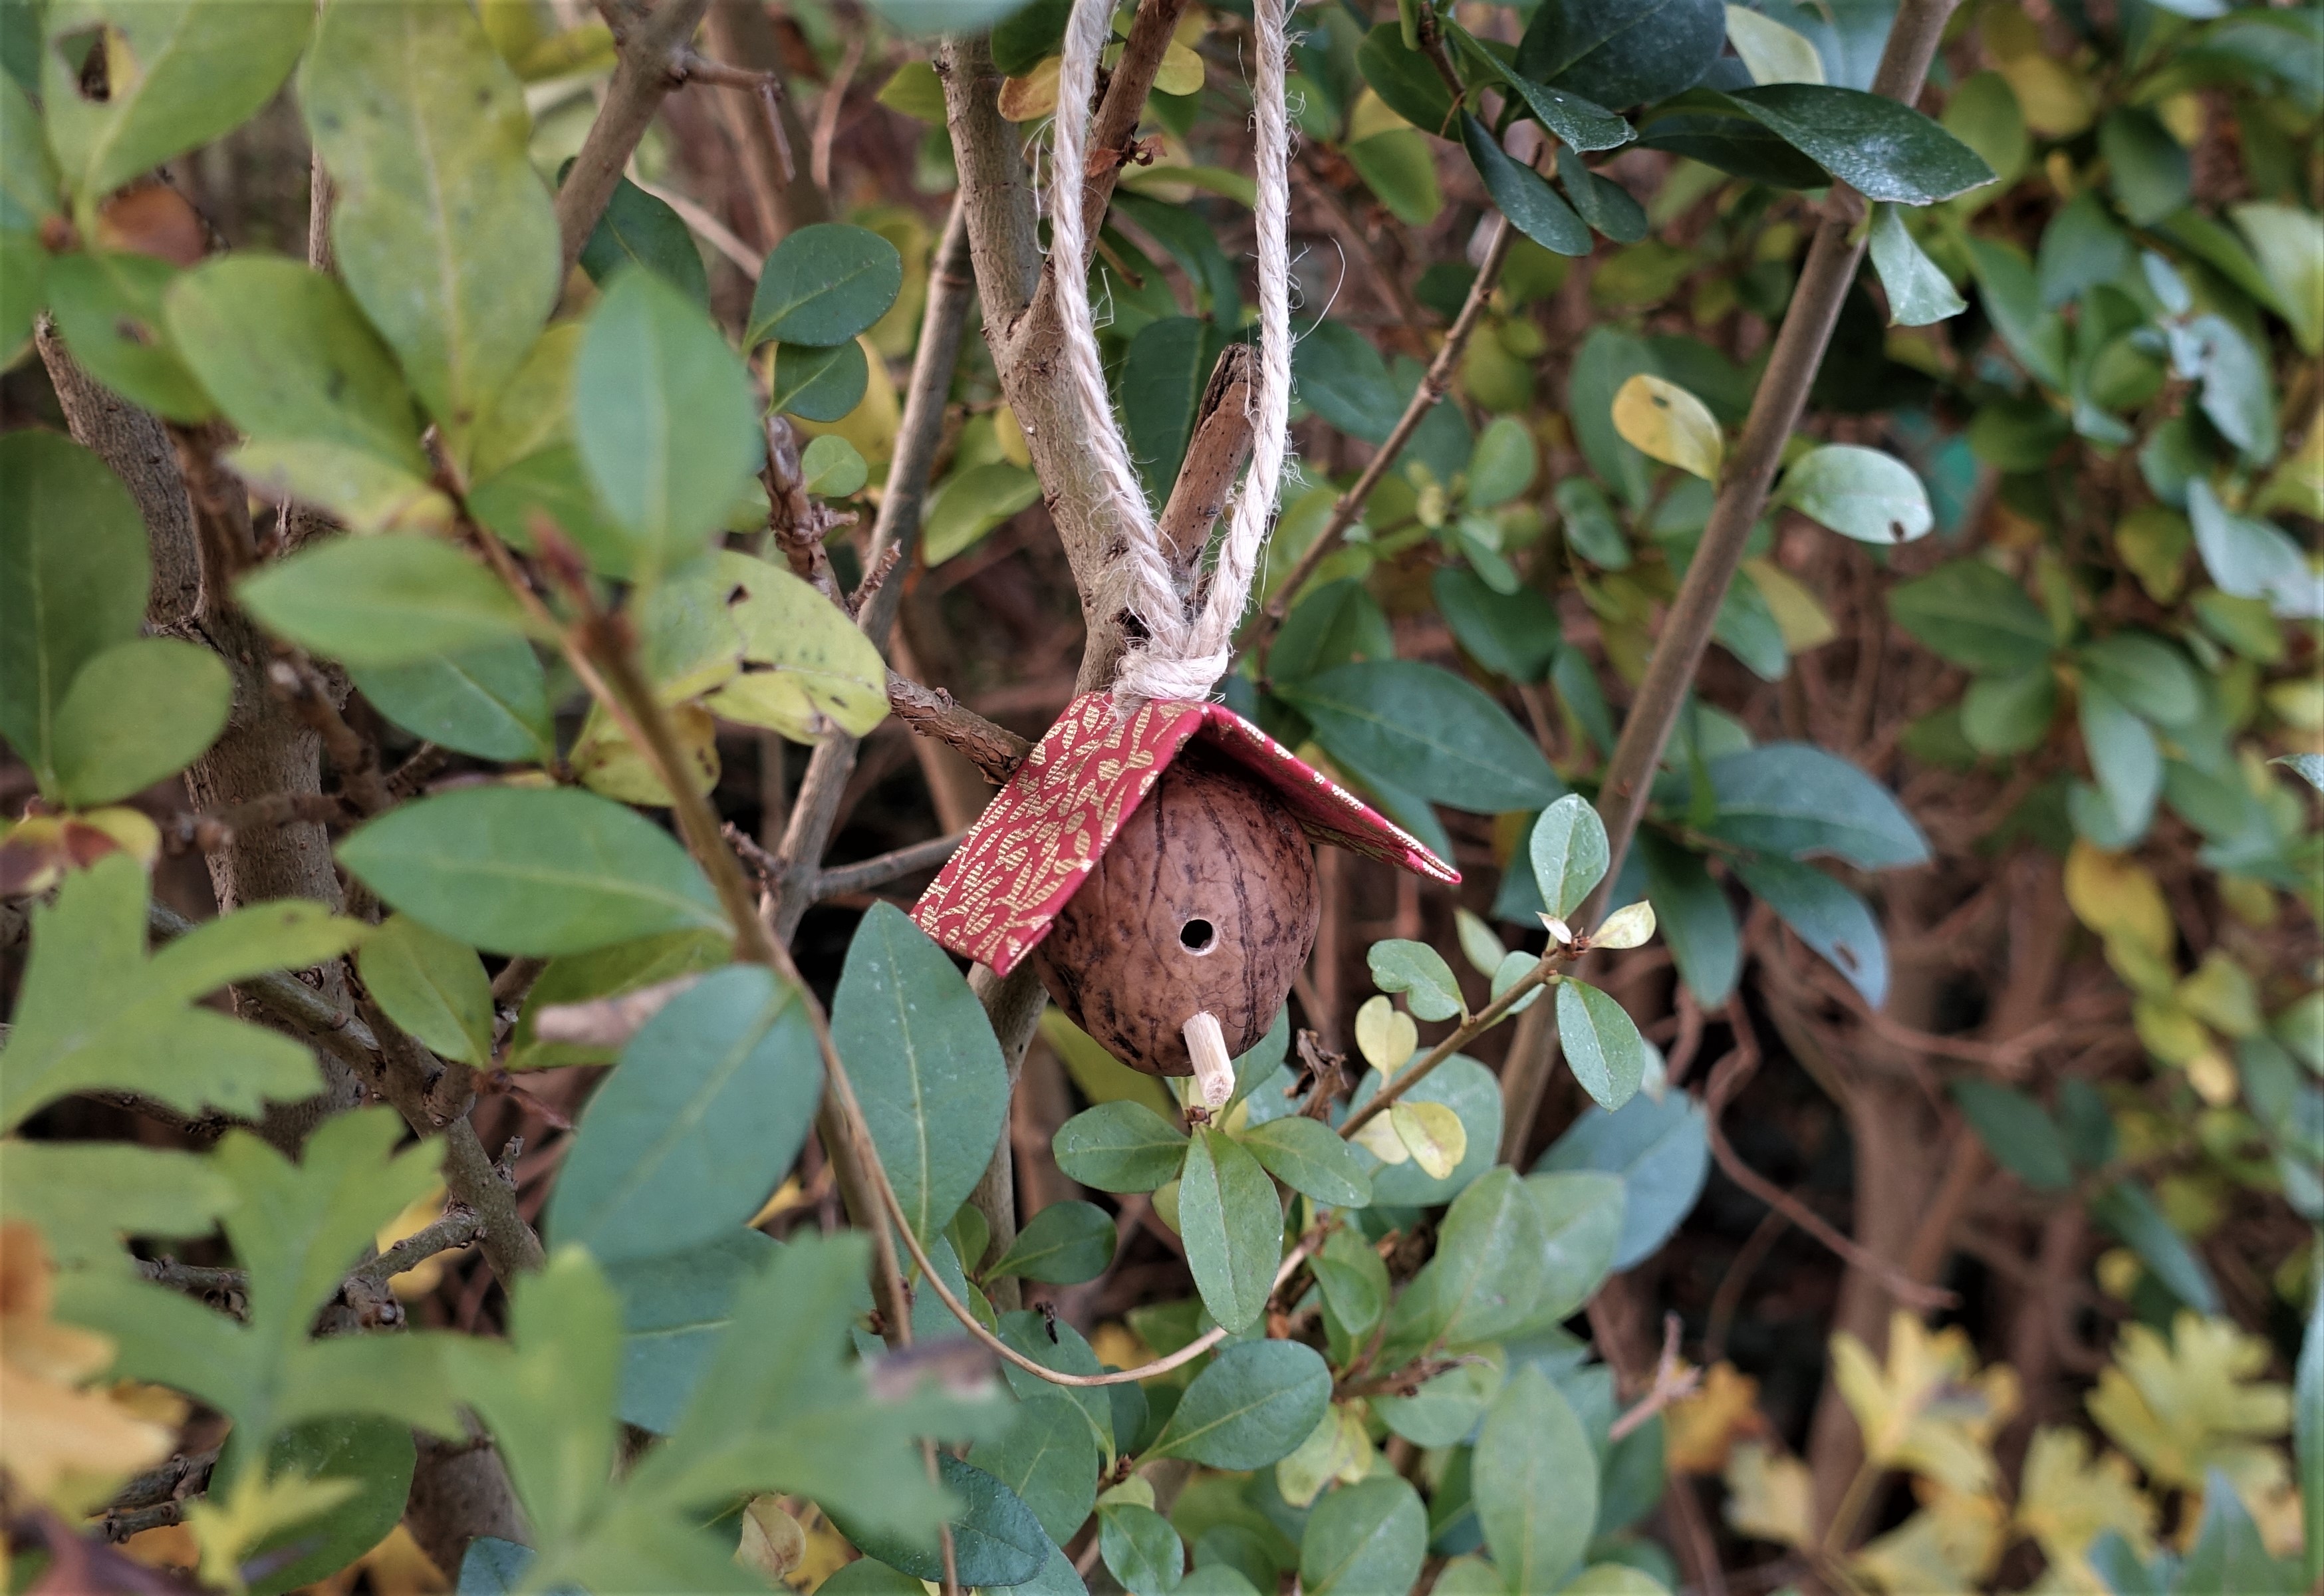 Miniature bird house made out of a walnut hanging in a tree